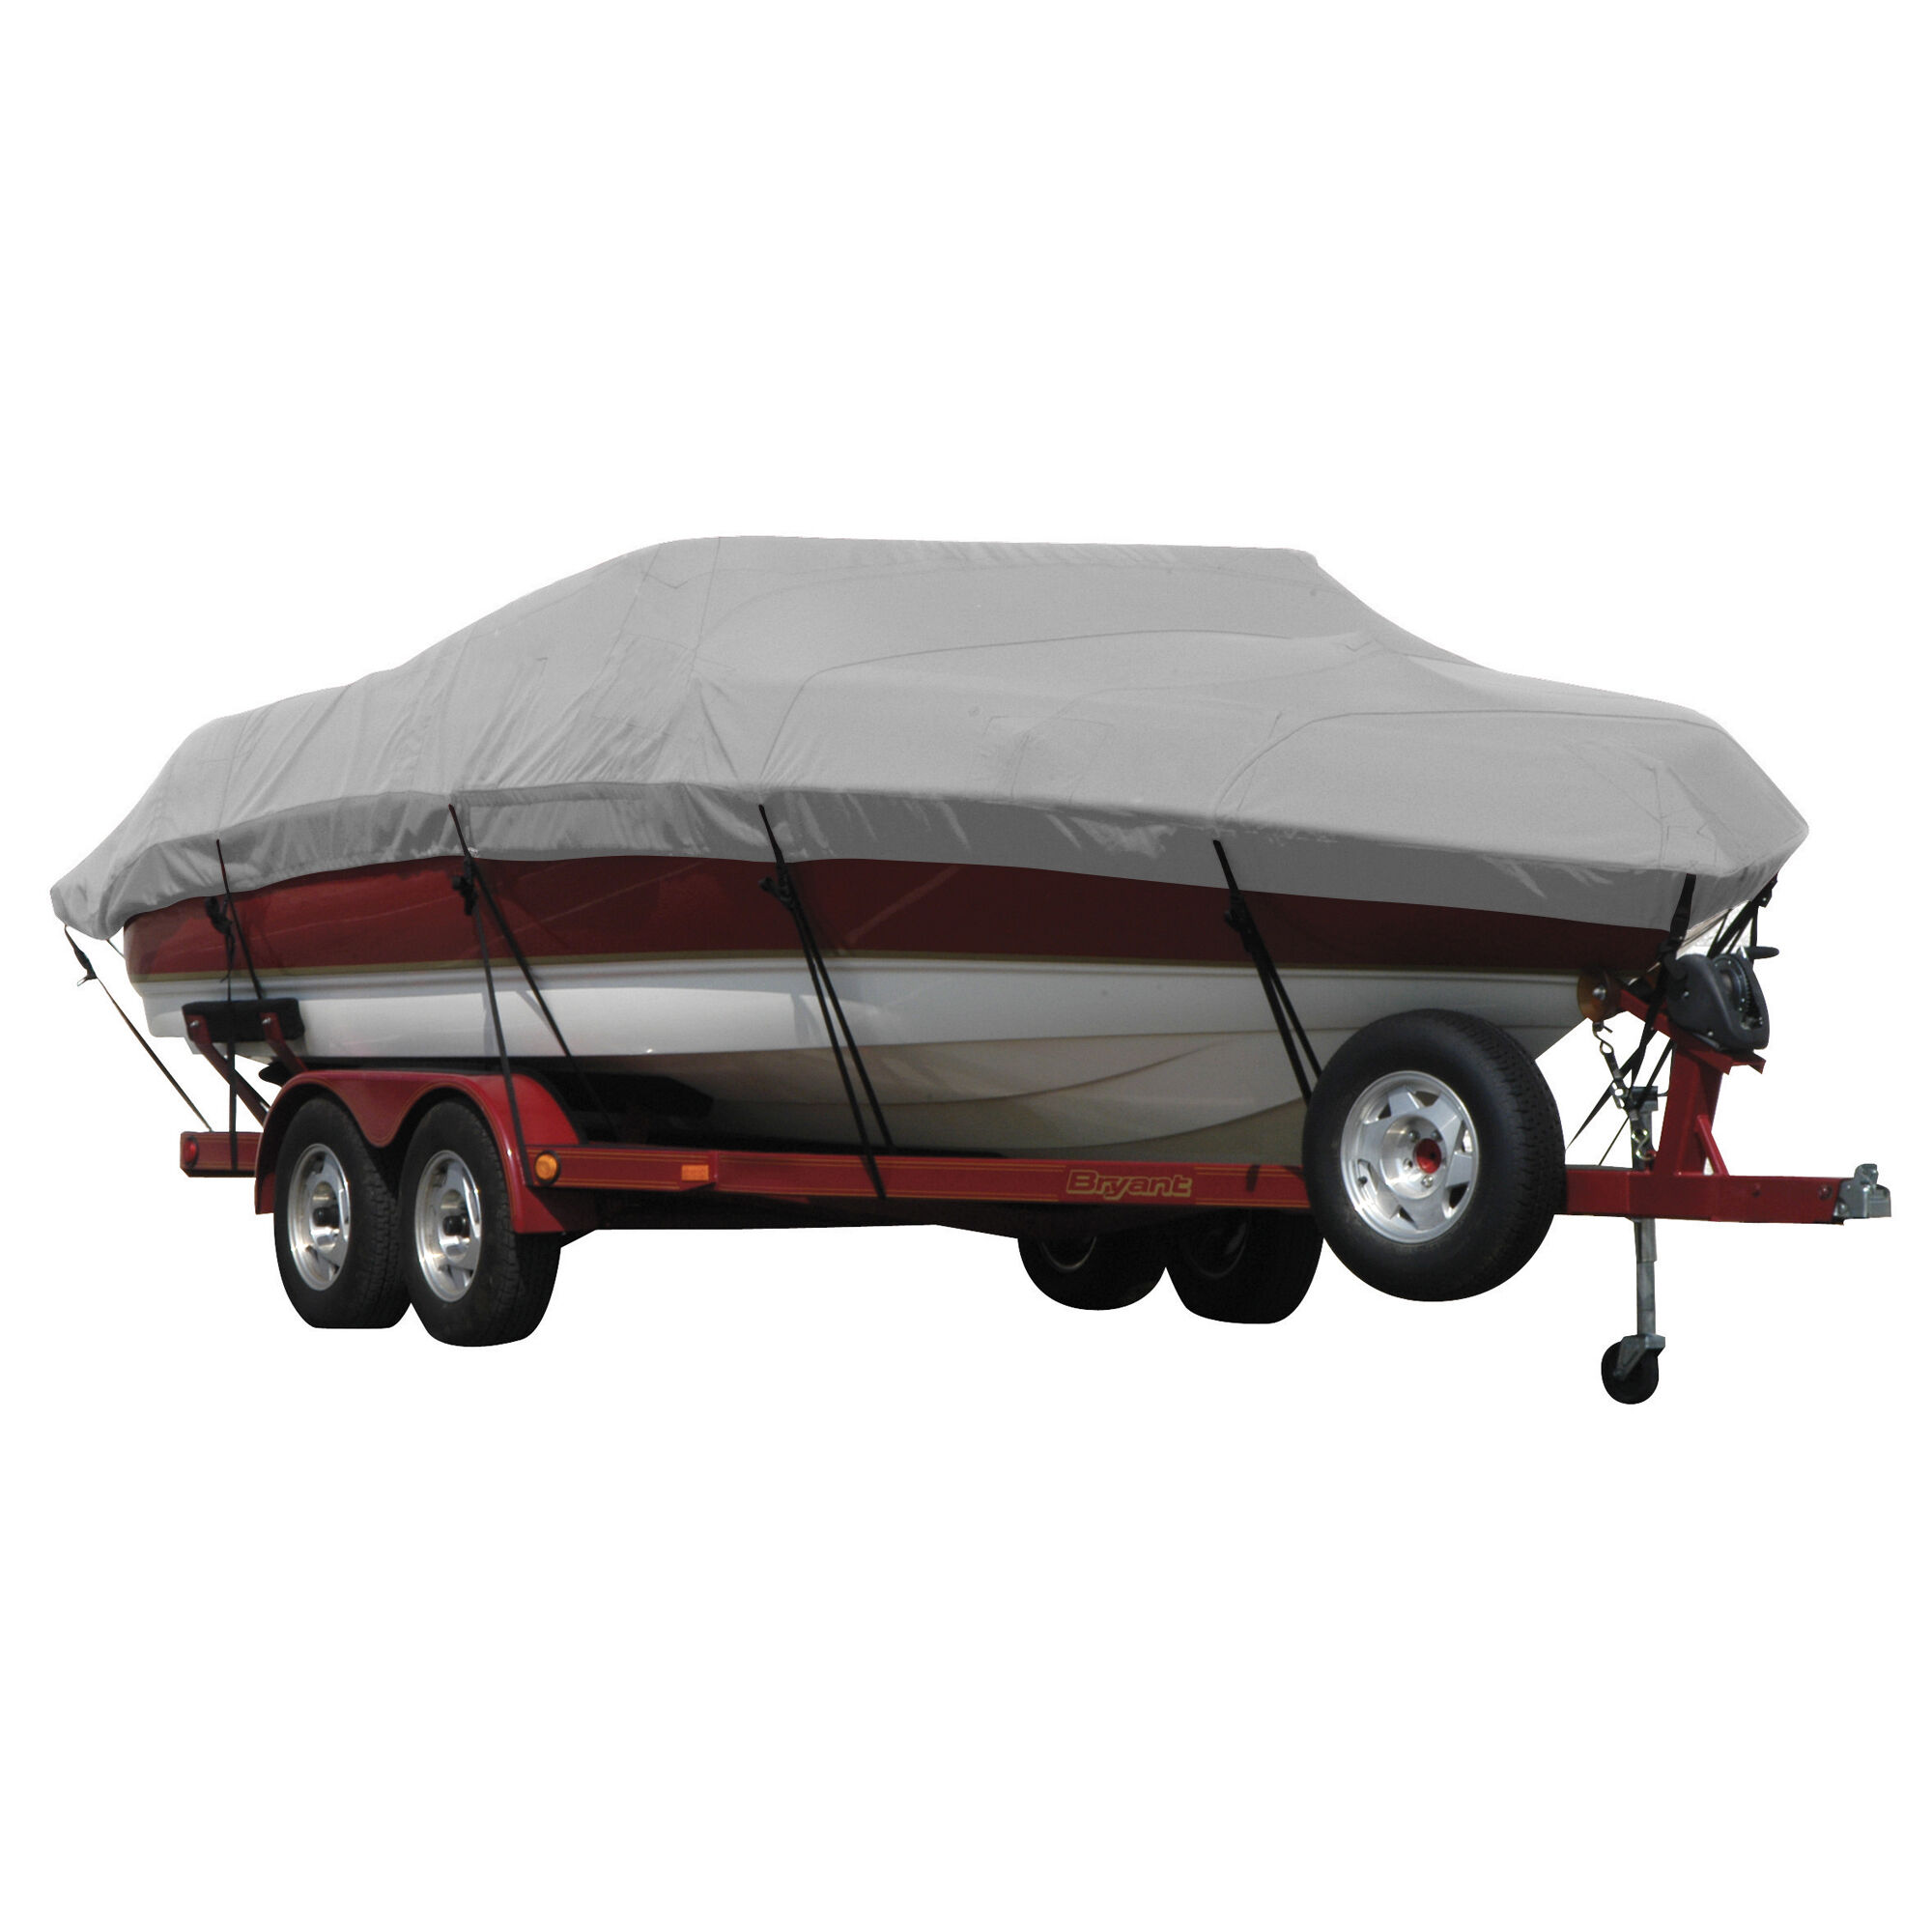 Covermate Exact Fit Sunbrella Boat Cover for Procraft 200 200 Side Console w/ Shield w/ Port Trolling Motor O/B. Grey